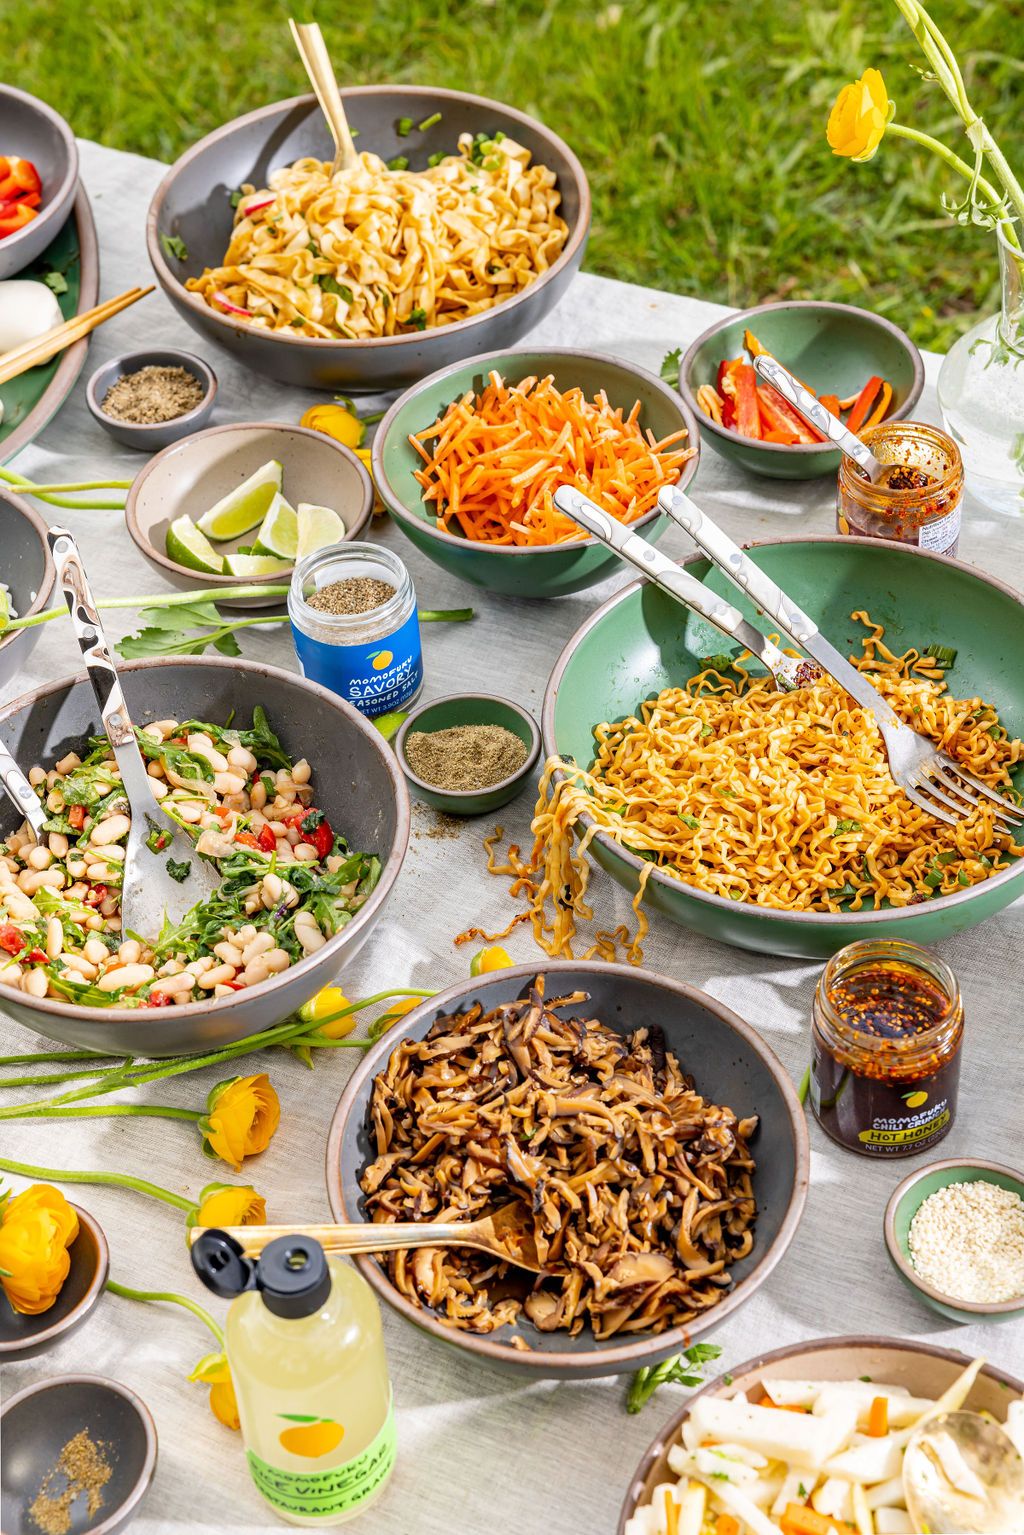 A table takes up most of the frame featuring many grey and green bowls of varying sizes with foods and serving utensils. Scattered around the table between the bowls are a bottle of rice vinegar, small jars of chili crunches, and yellow flowers. There is grass in the background around the table.